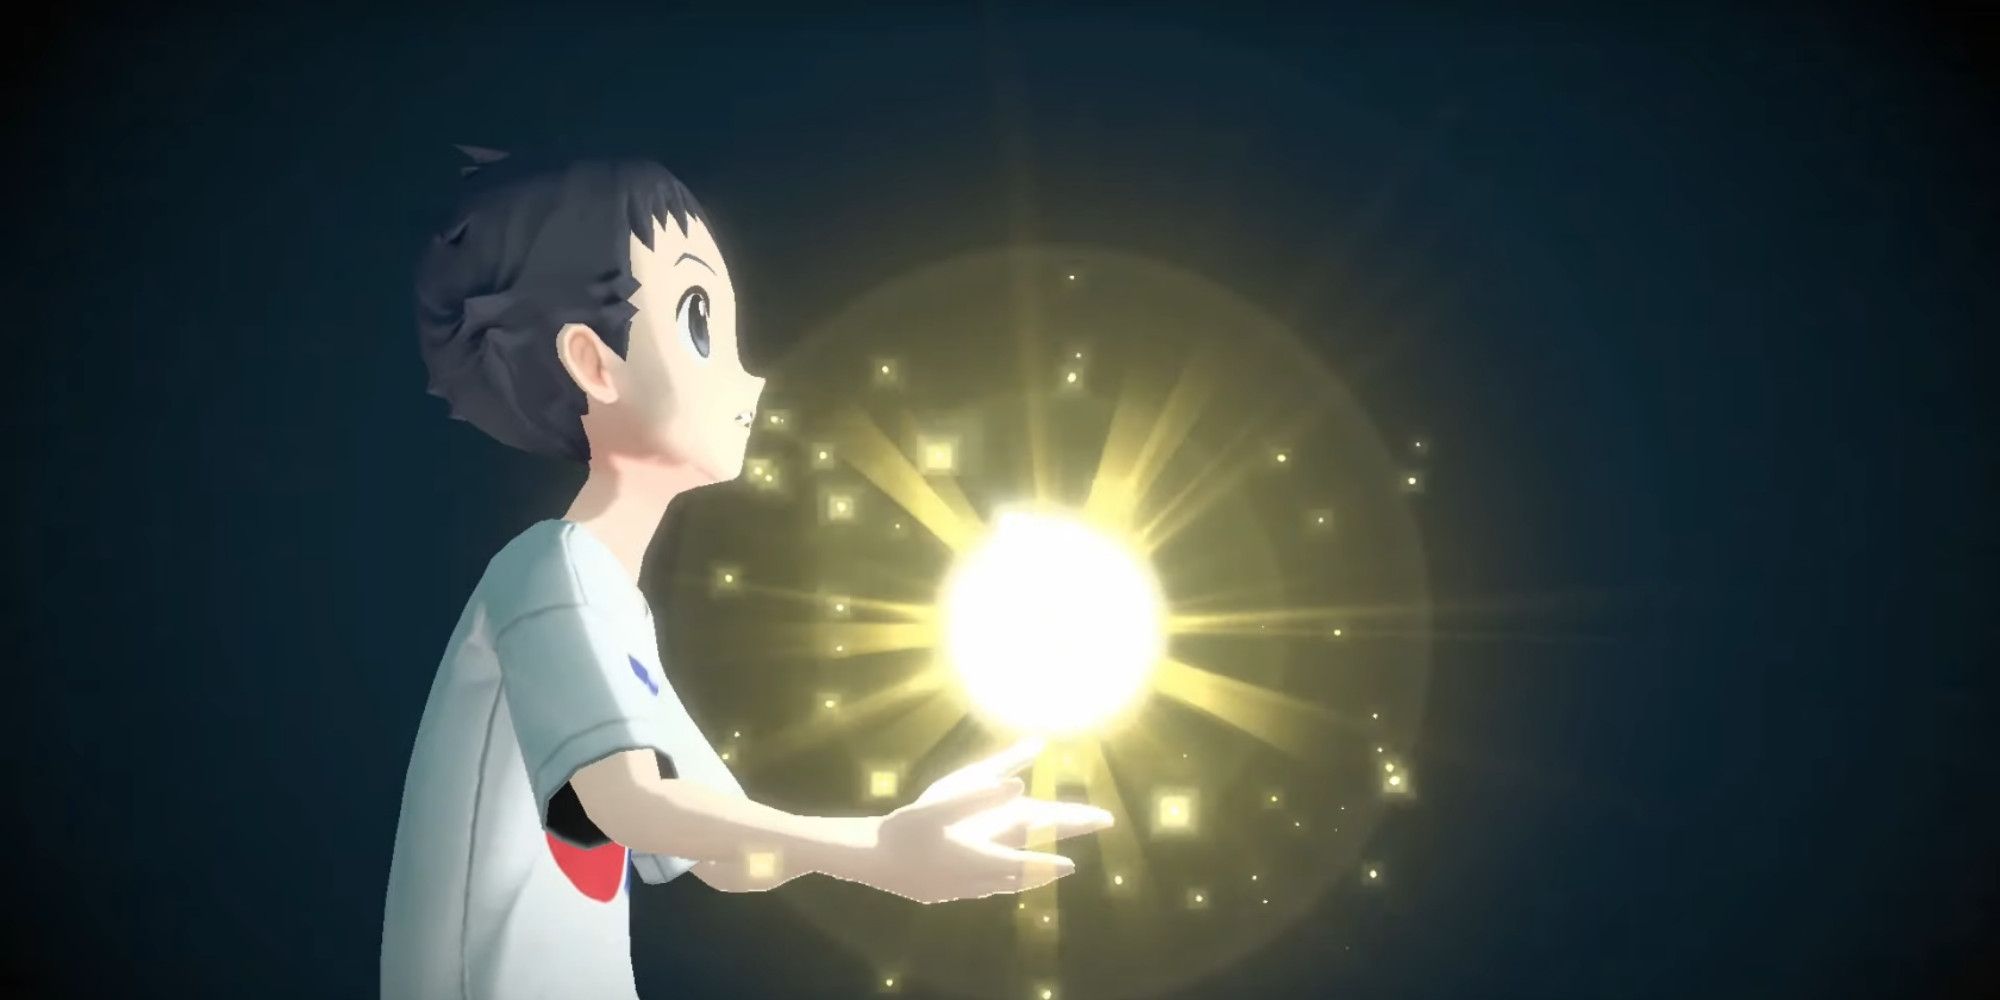 Main Character in the intro cutscene, holding a glowing ball